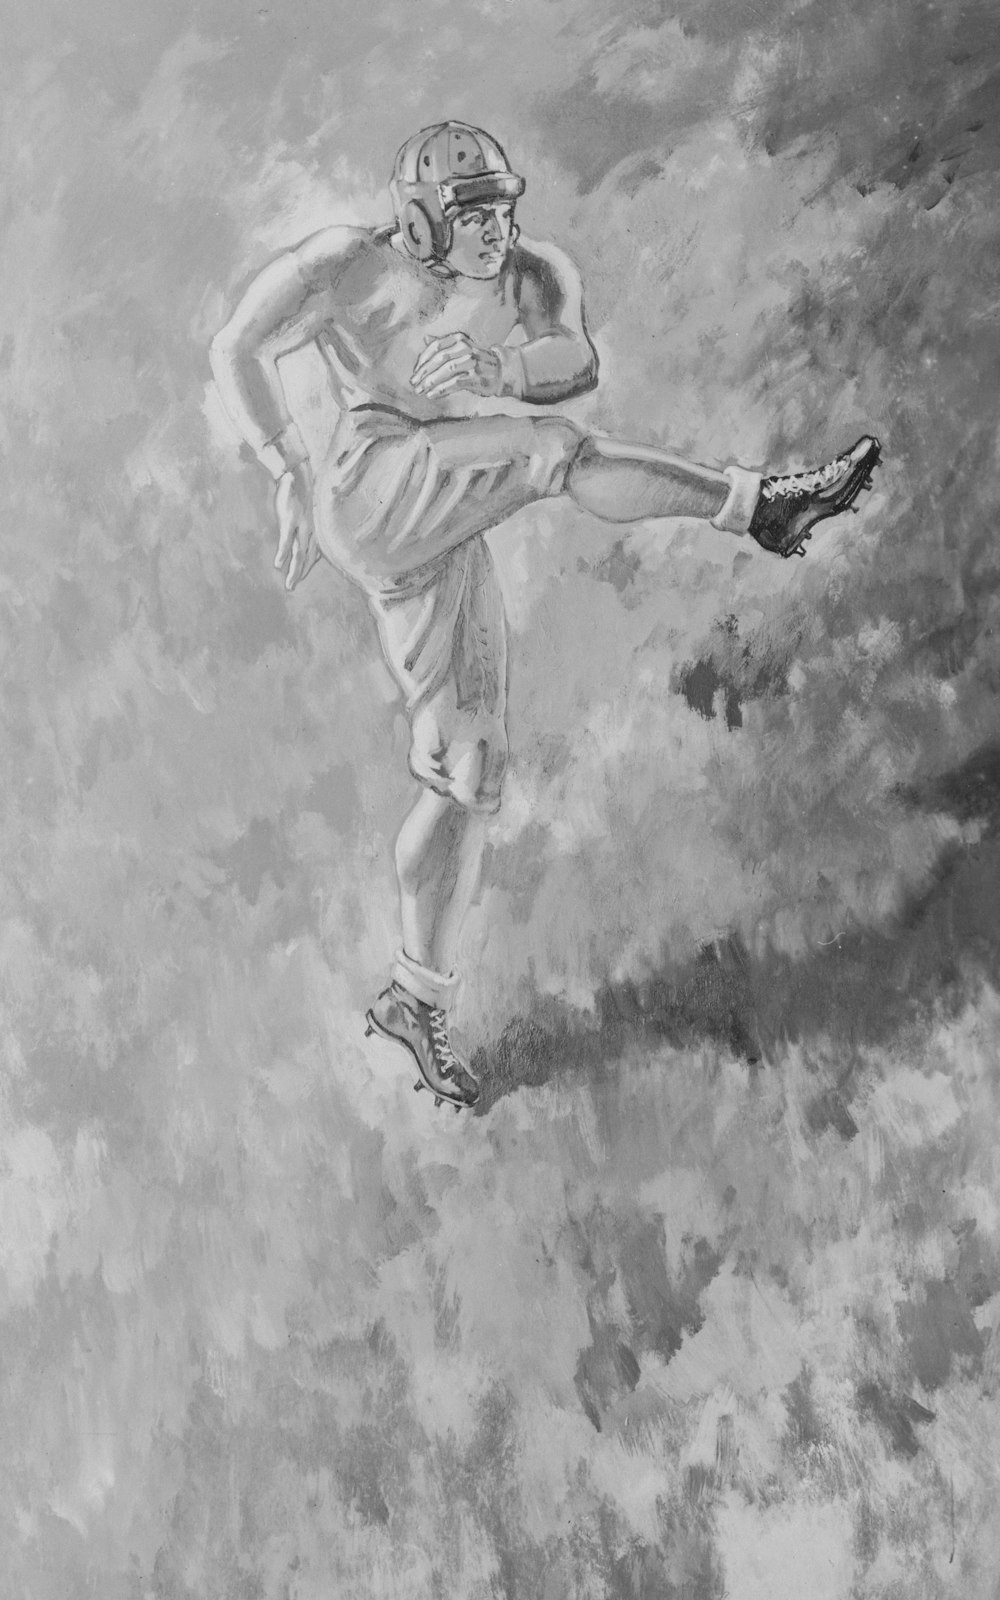 a drawing of a football player in the air